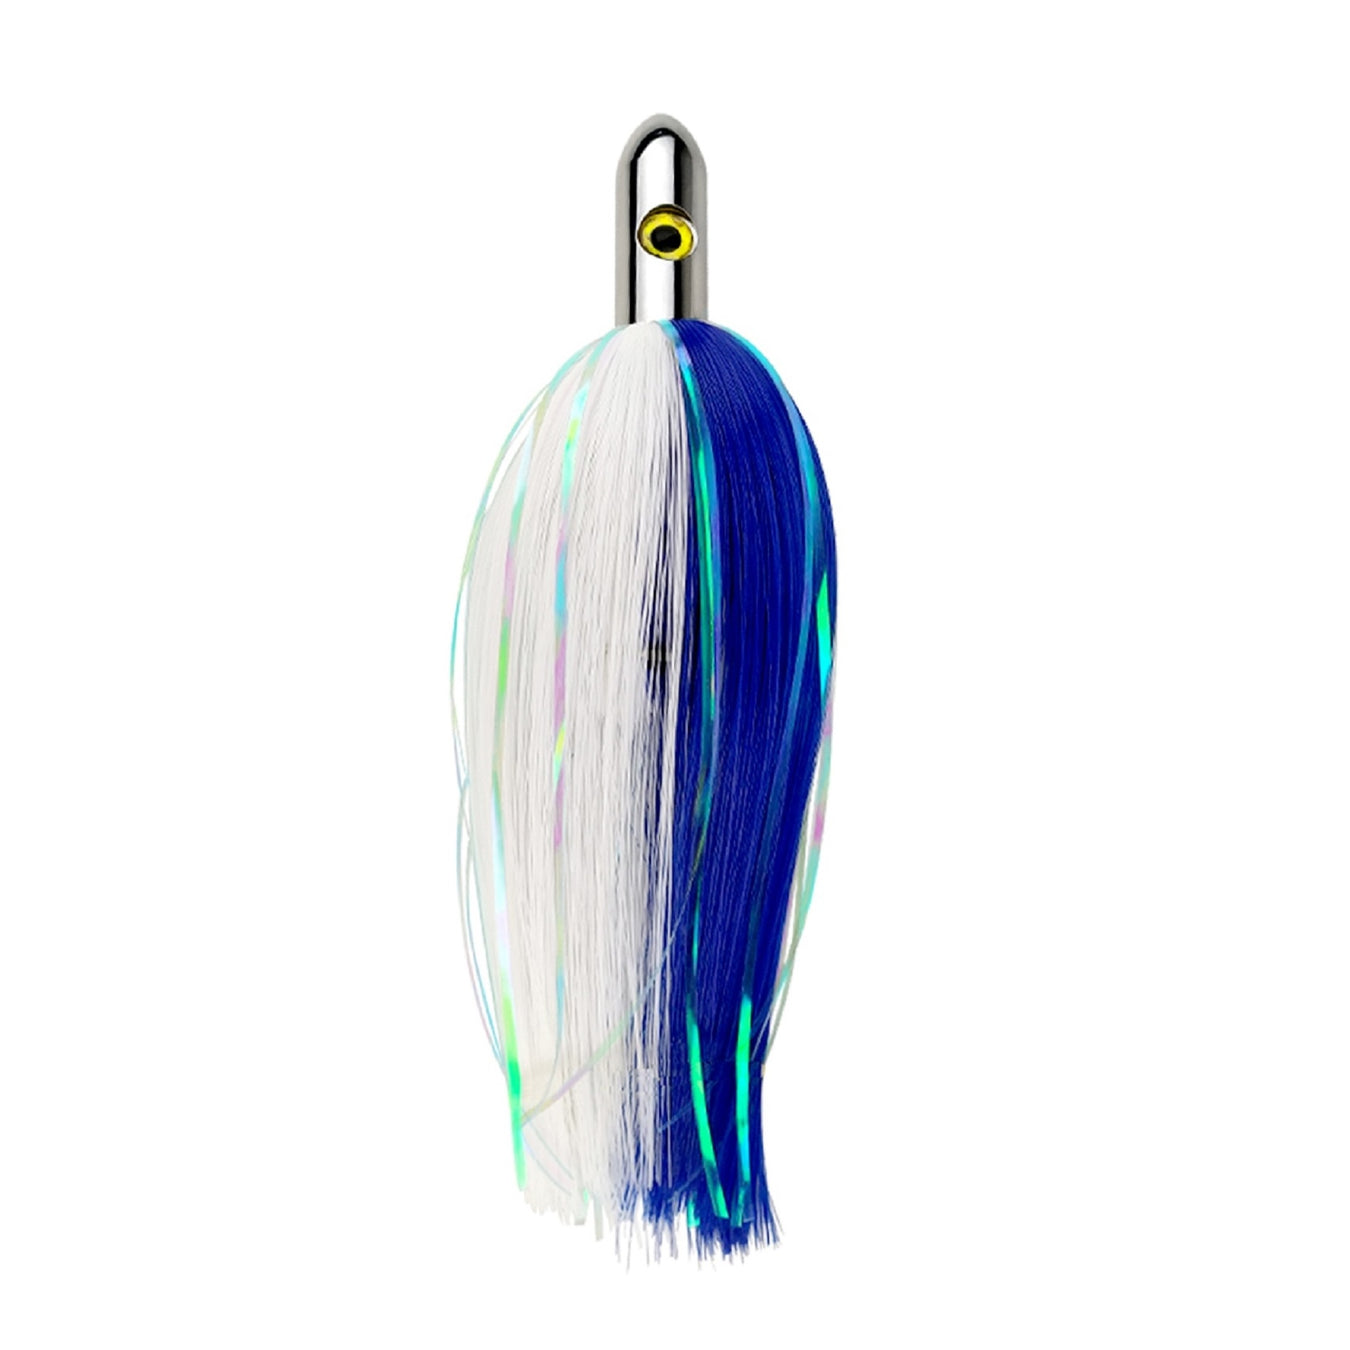 OCEAN CAT Saltwater Trolling Lures Set, Offshore Fishing Lure Rigged Circle  Hook & 6 in/9 in Hoochie Octopus/Squid Skirts for Catching Mahi, Tuna